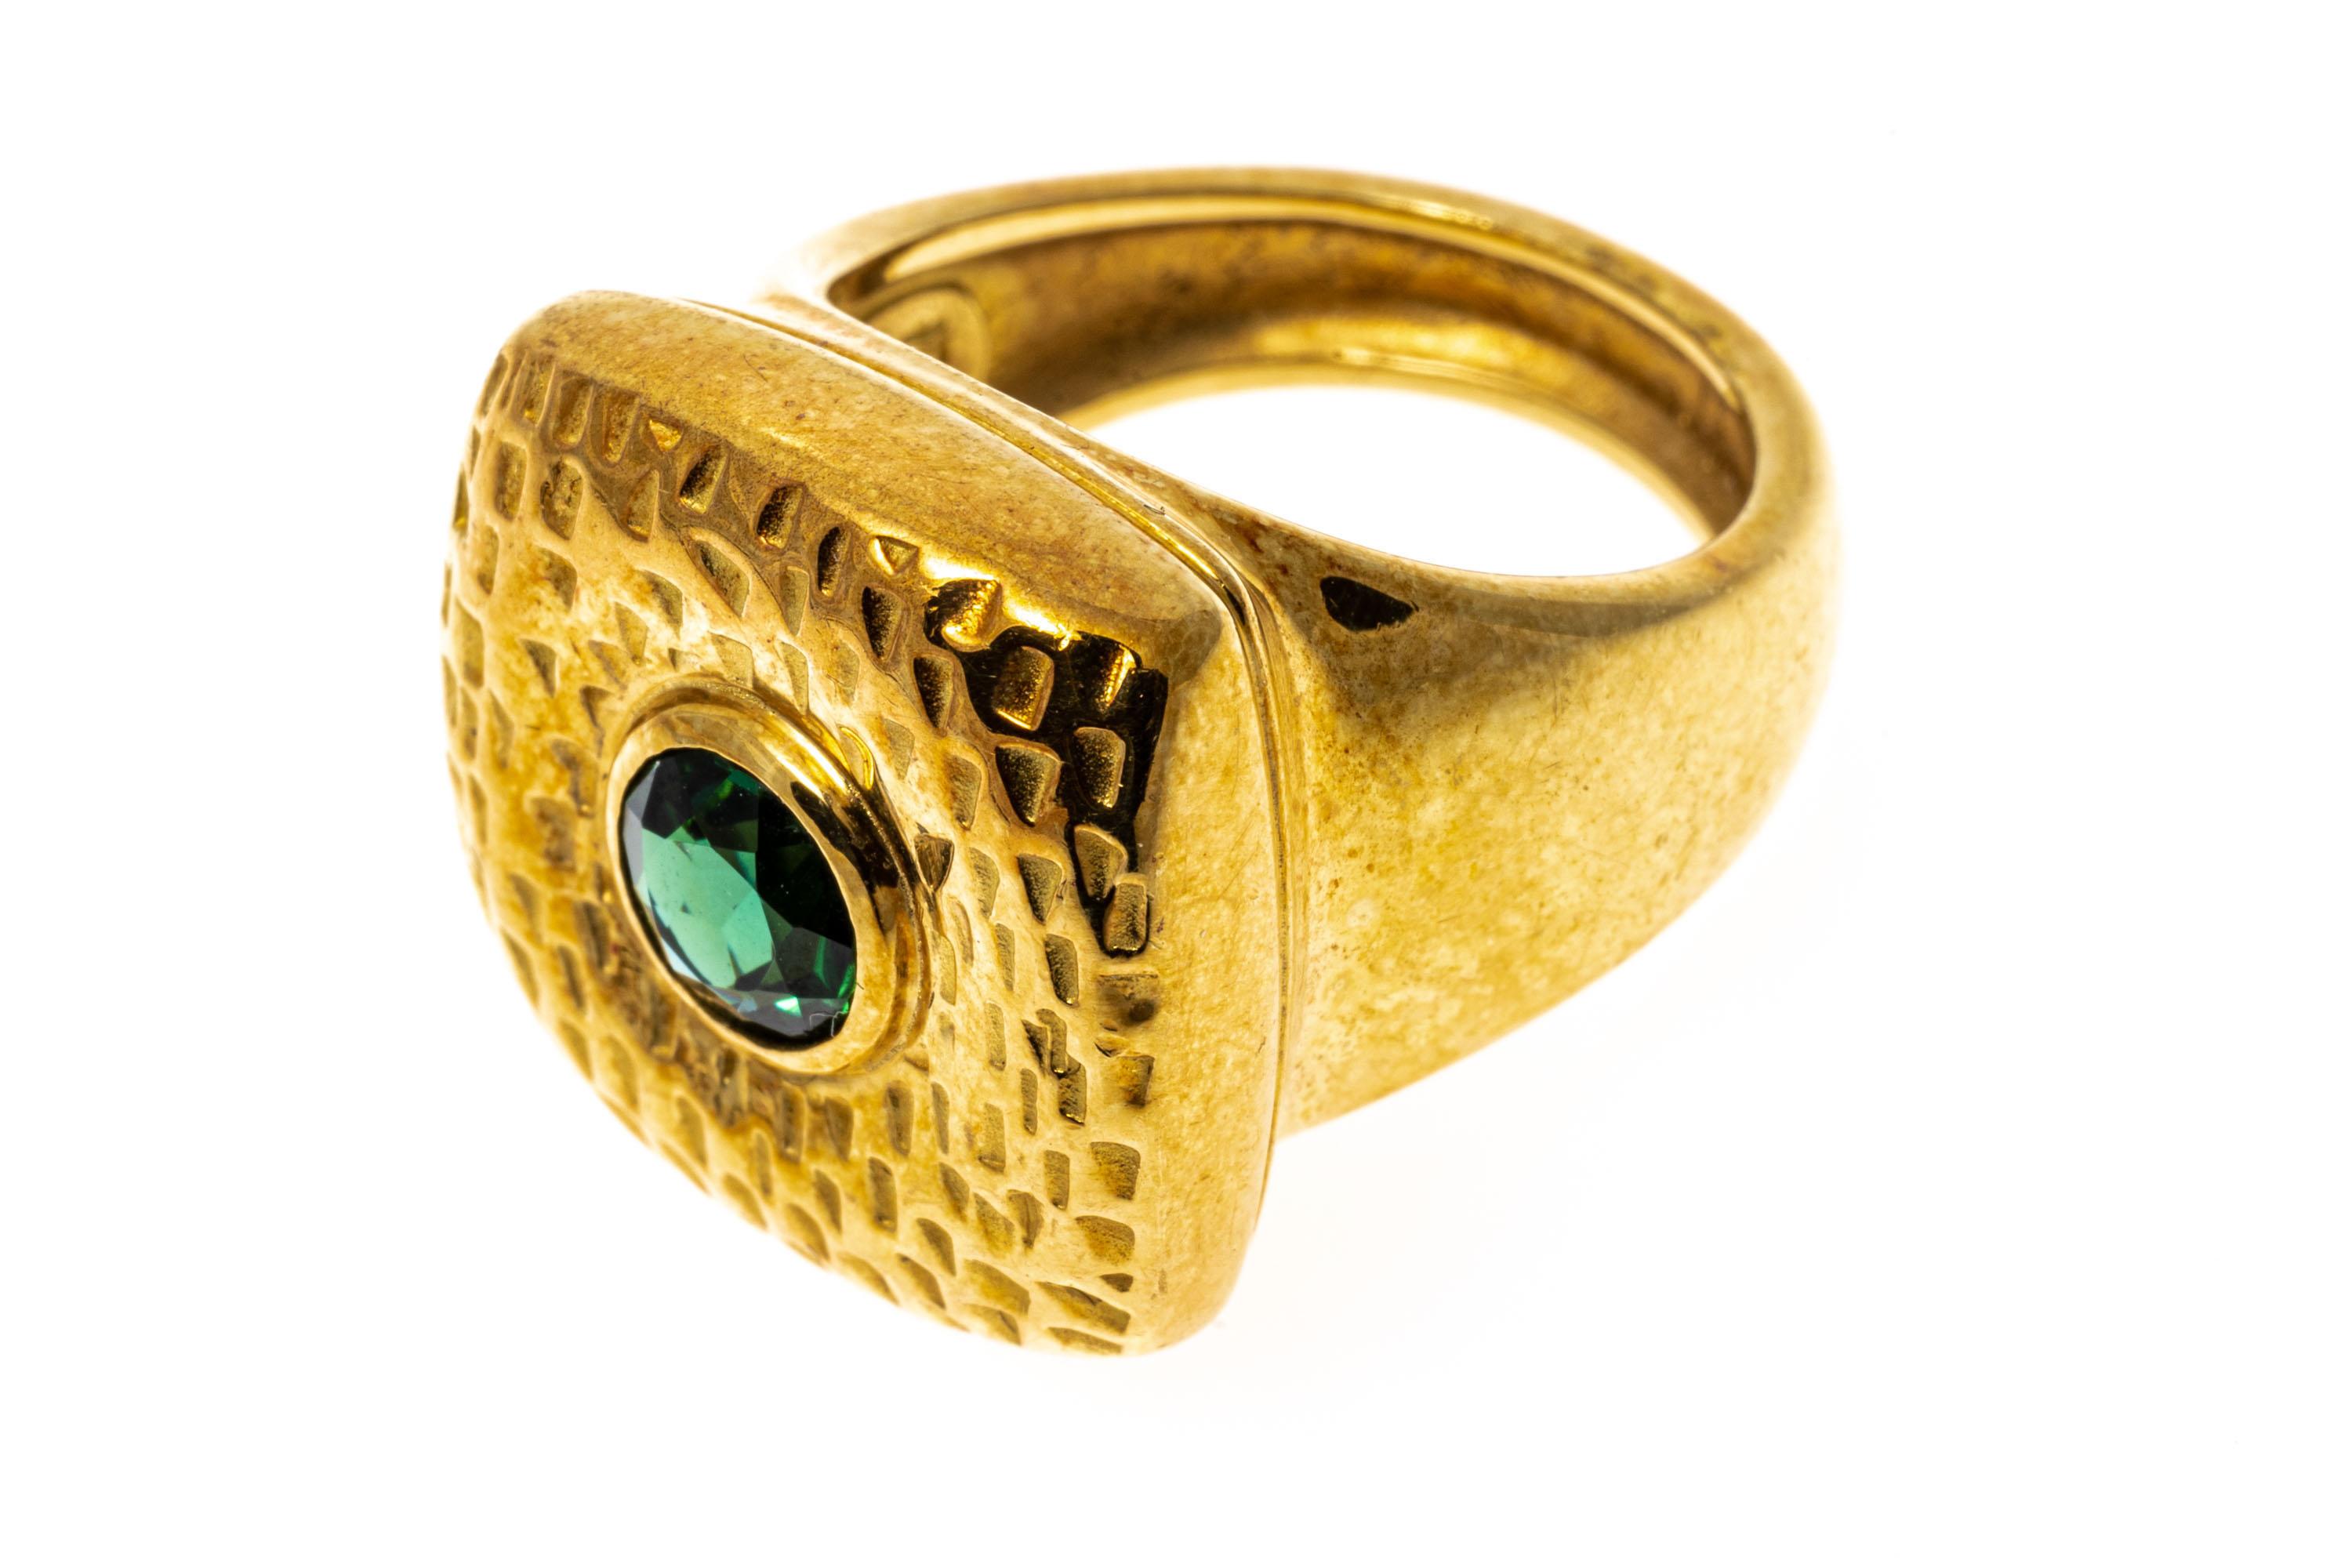 18k yellow gold ring. This beautiful, ultra contemporary ring has a wide, square cushion profile, with a mod, chased pattern adorned across the top and set with a round faceted, dark green color tourmaline, approximately 0.57 CTS, and bezel set. The